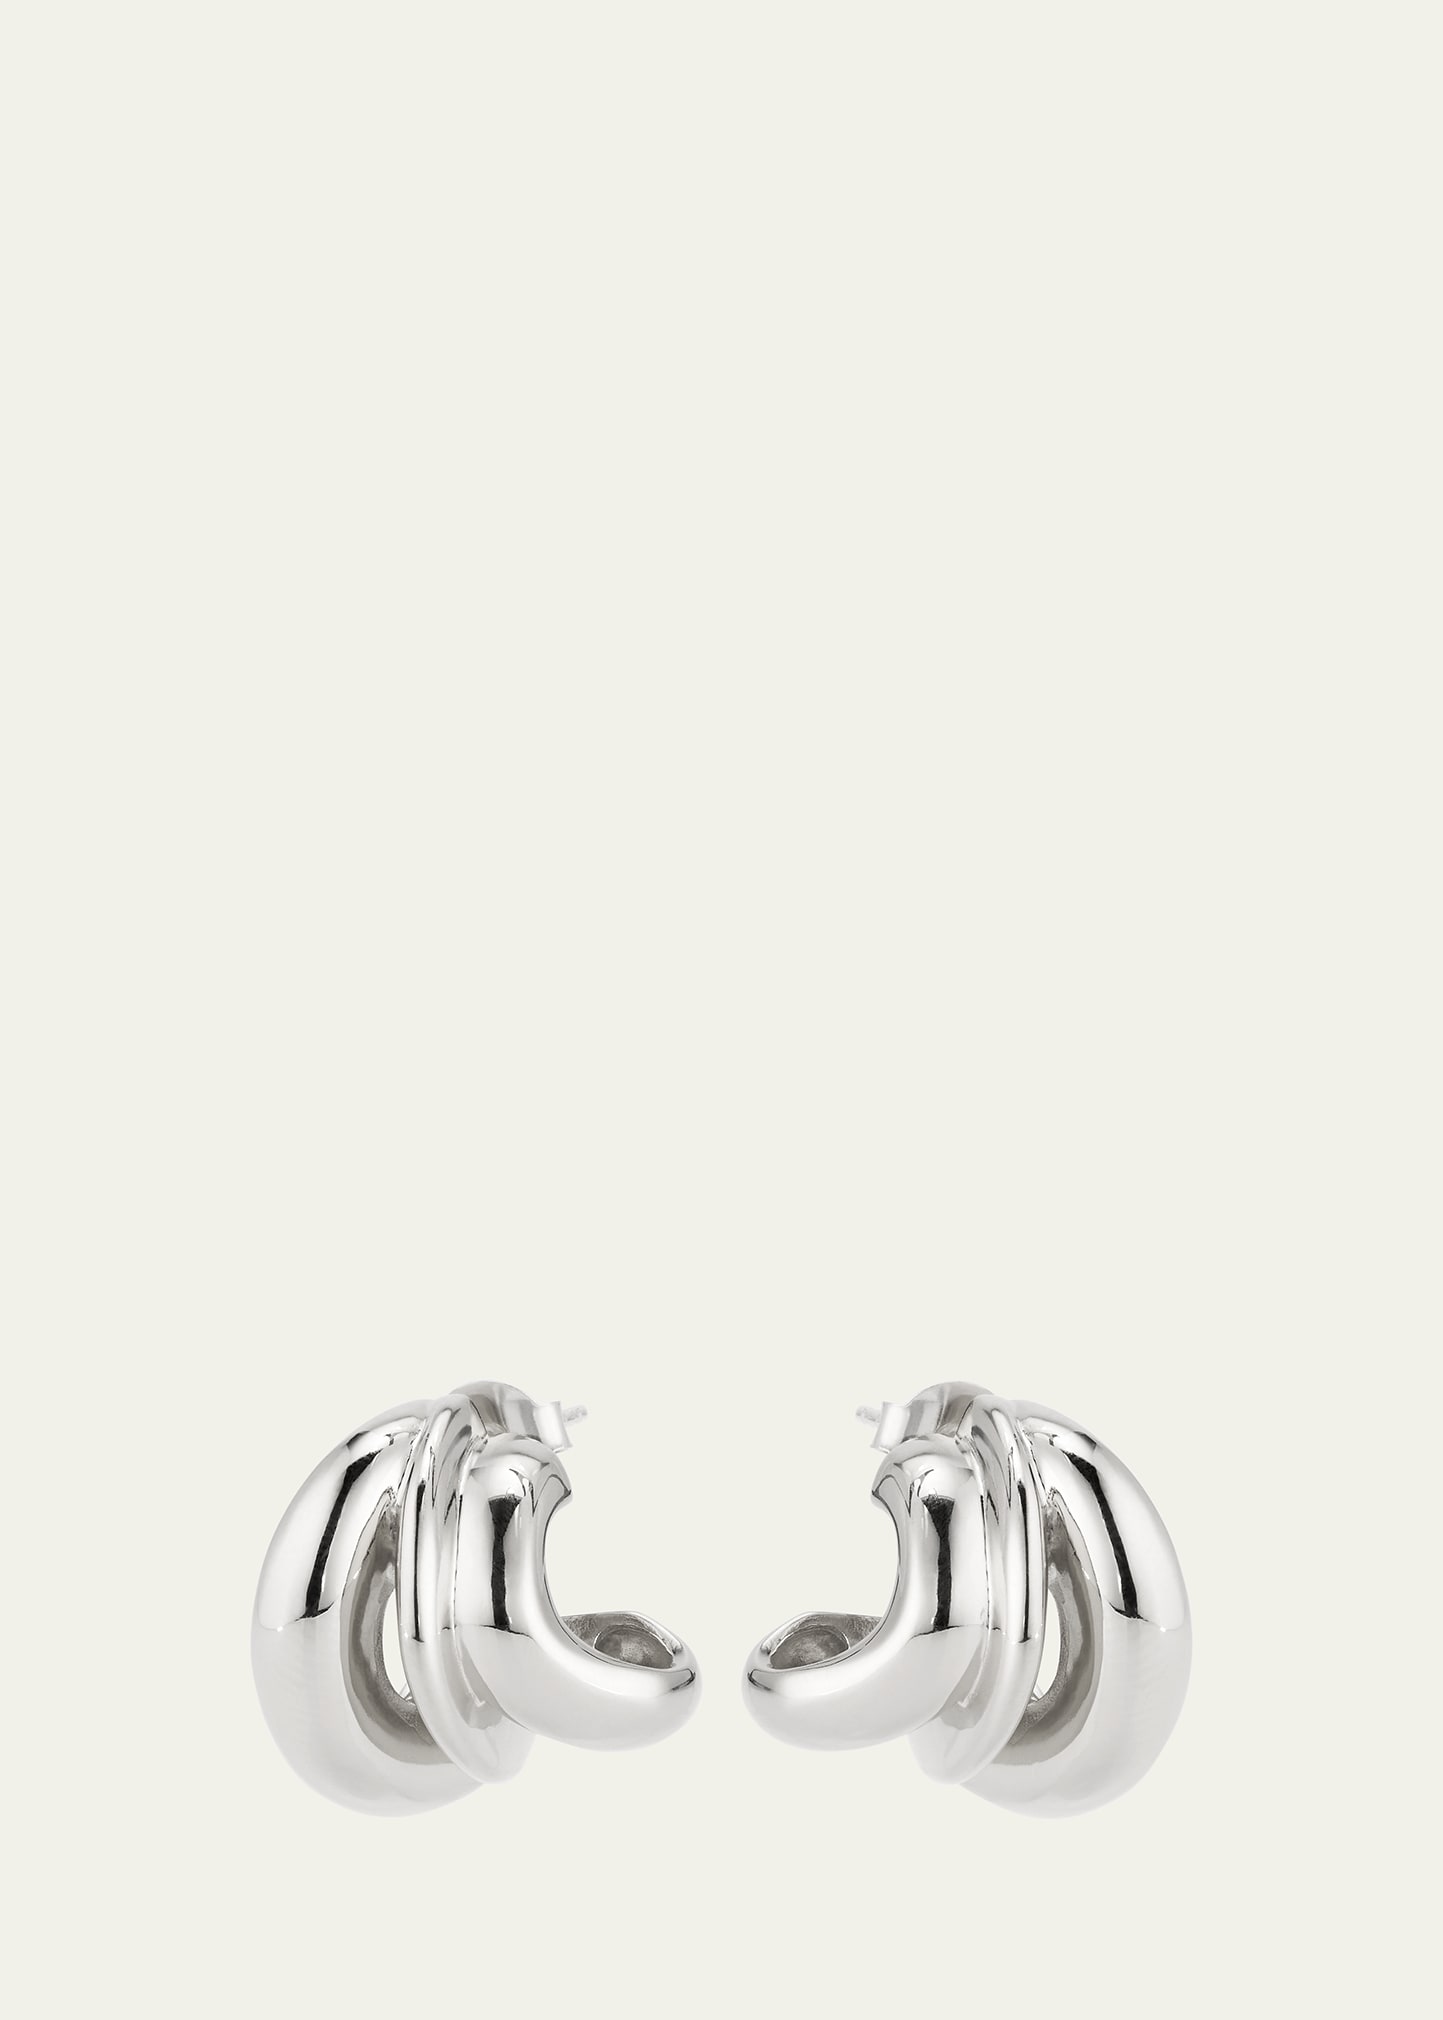 Completedworks Recycled Sterling Silver Stud Earrings